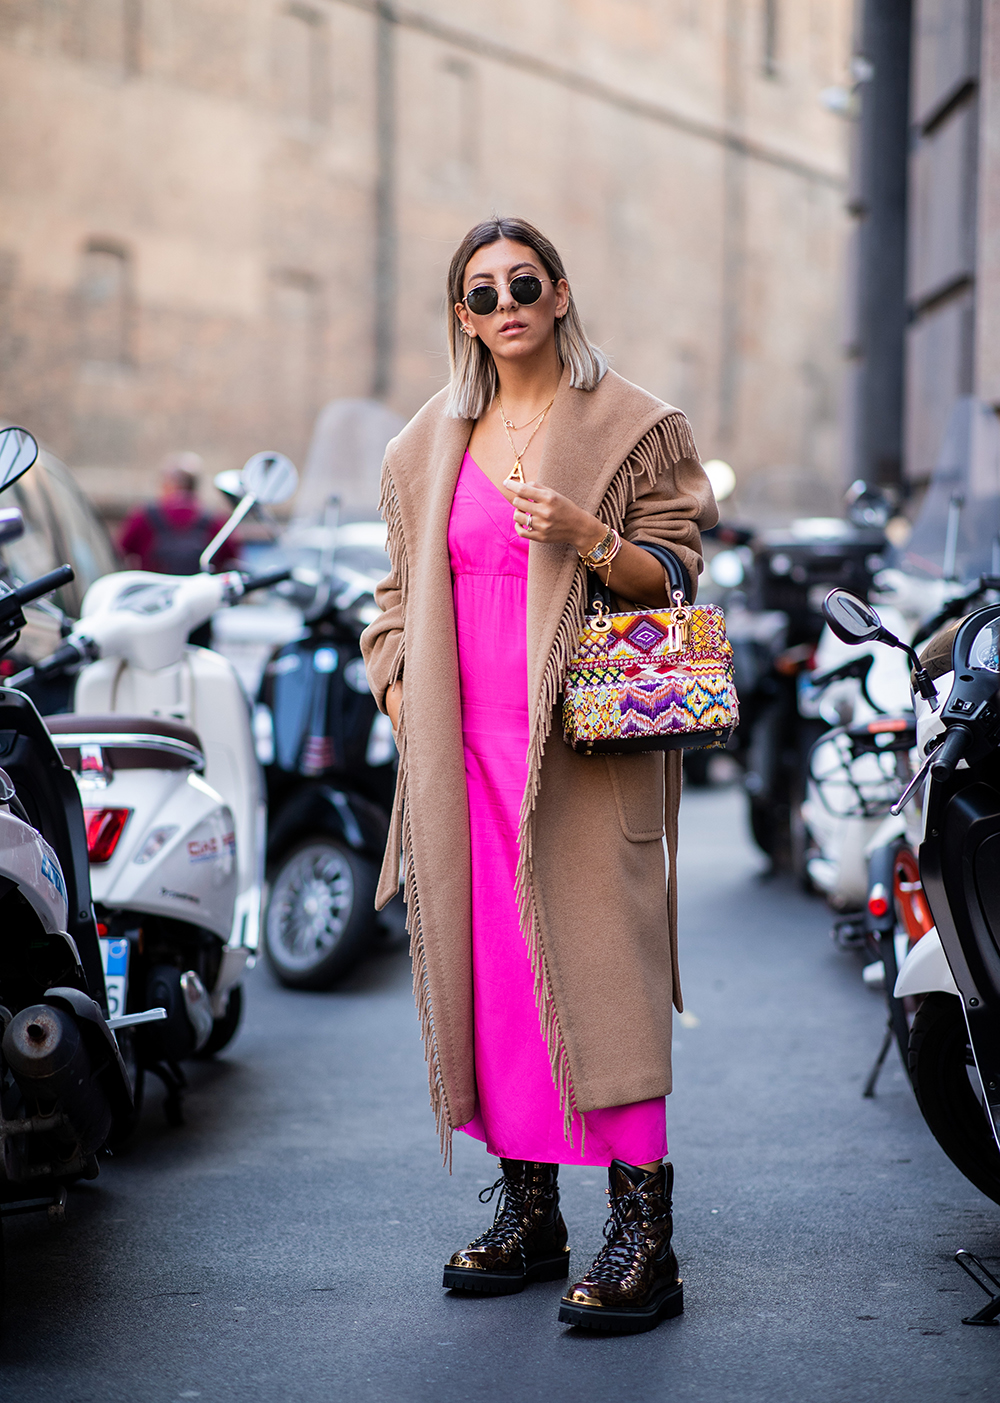 MILAN, ITALY - SEPTEMBER 20: Aylin Koenig wearing pink dress, beige coat, Dior bag is seen outside Max Mara during Milan Fashion Week Spring/Summer 2019 on September 20, 2018 in Milan, Italy. (Photo by Christian Vierig/Getty Images)